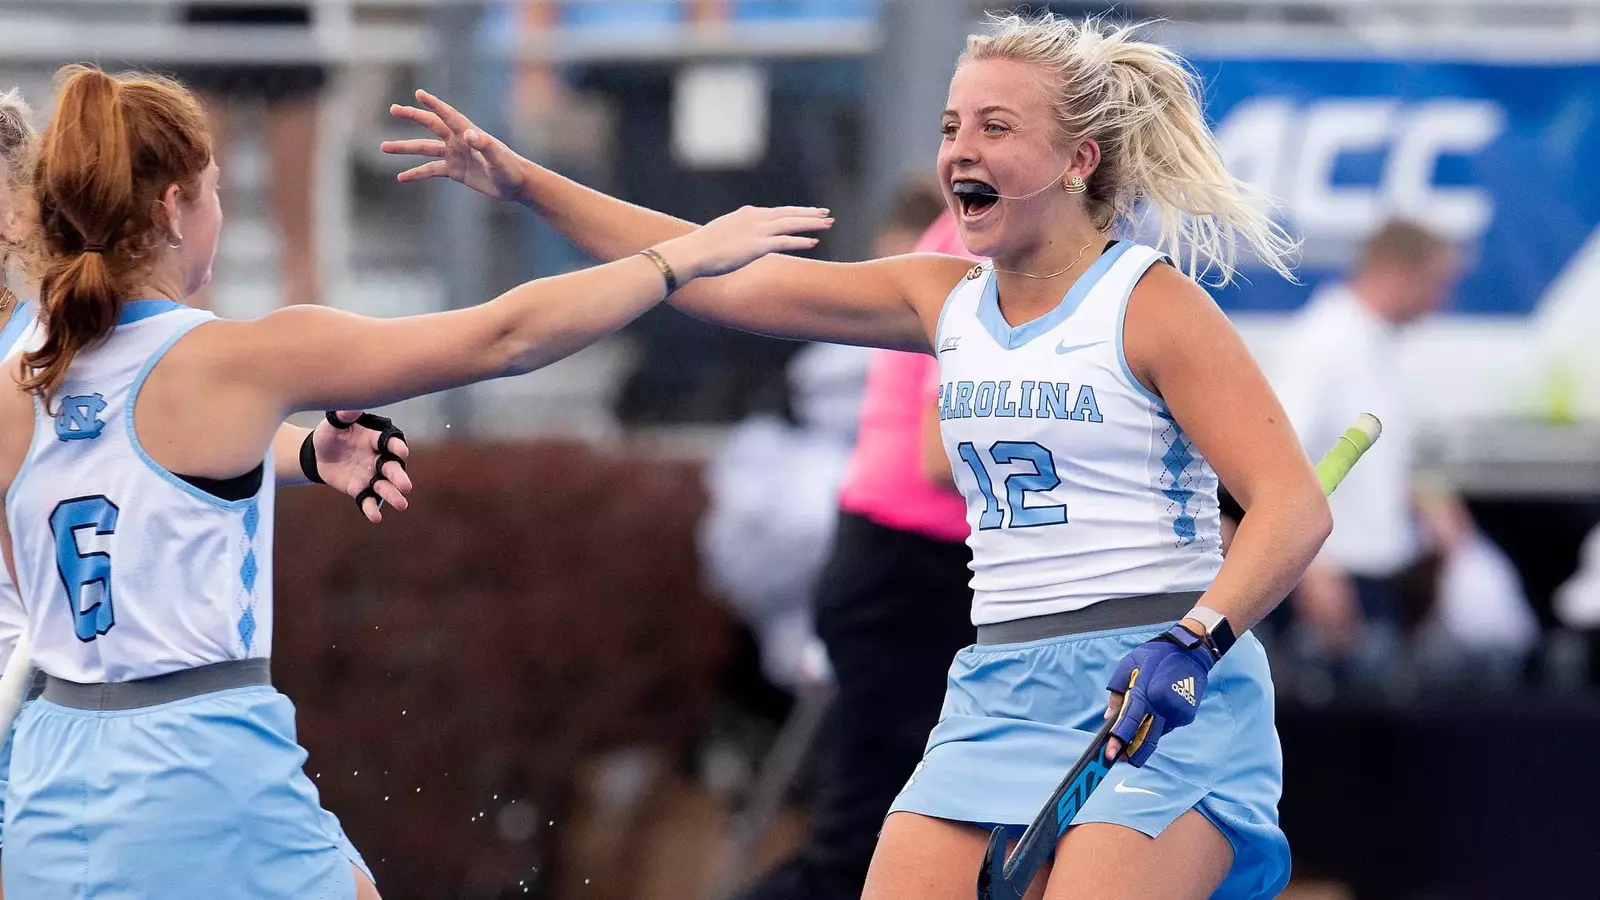 Ryleigh Heck, Kelly Smith Named To USA Field Hockey Squad